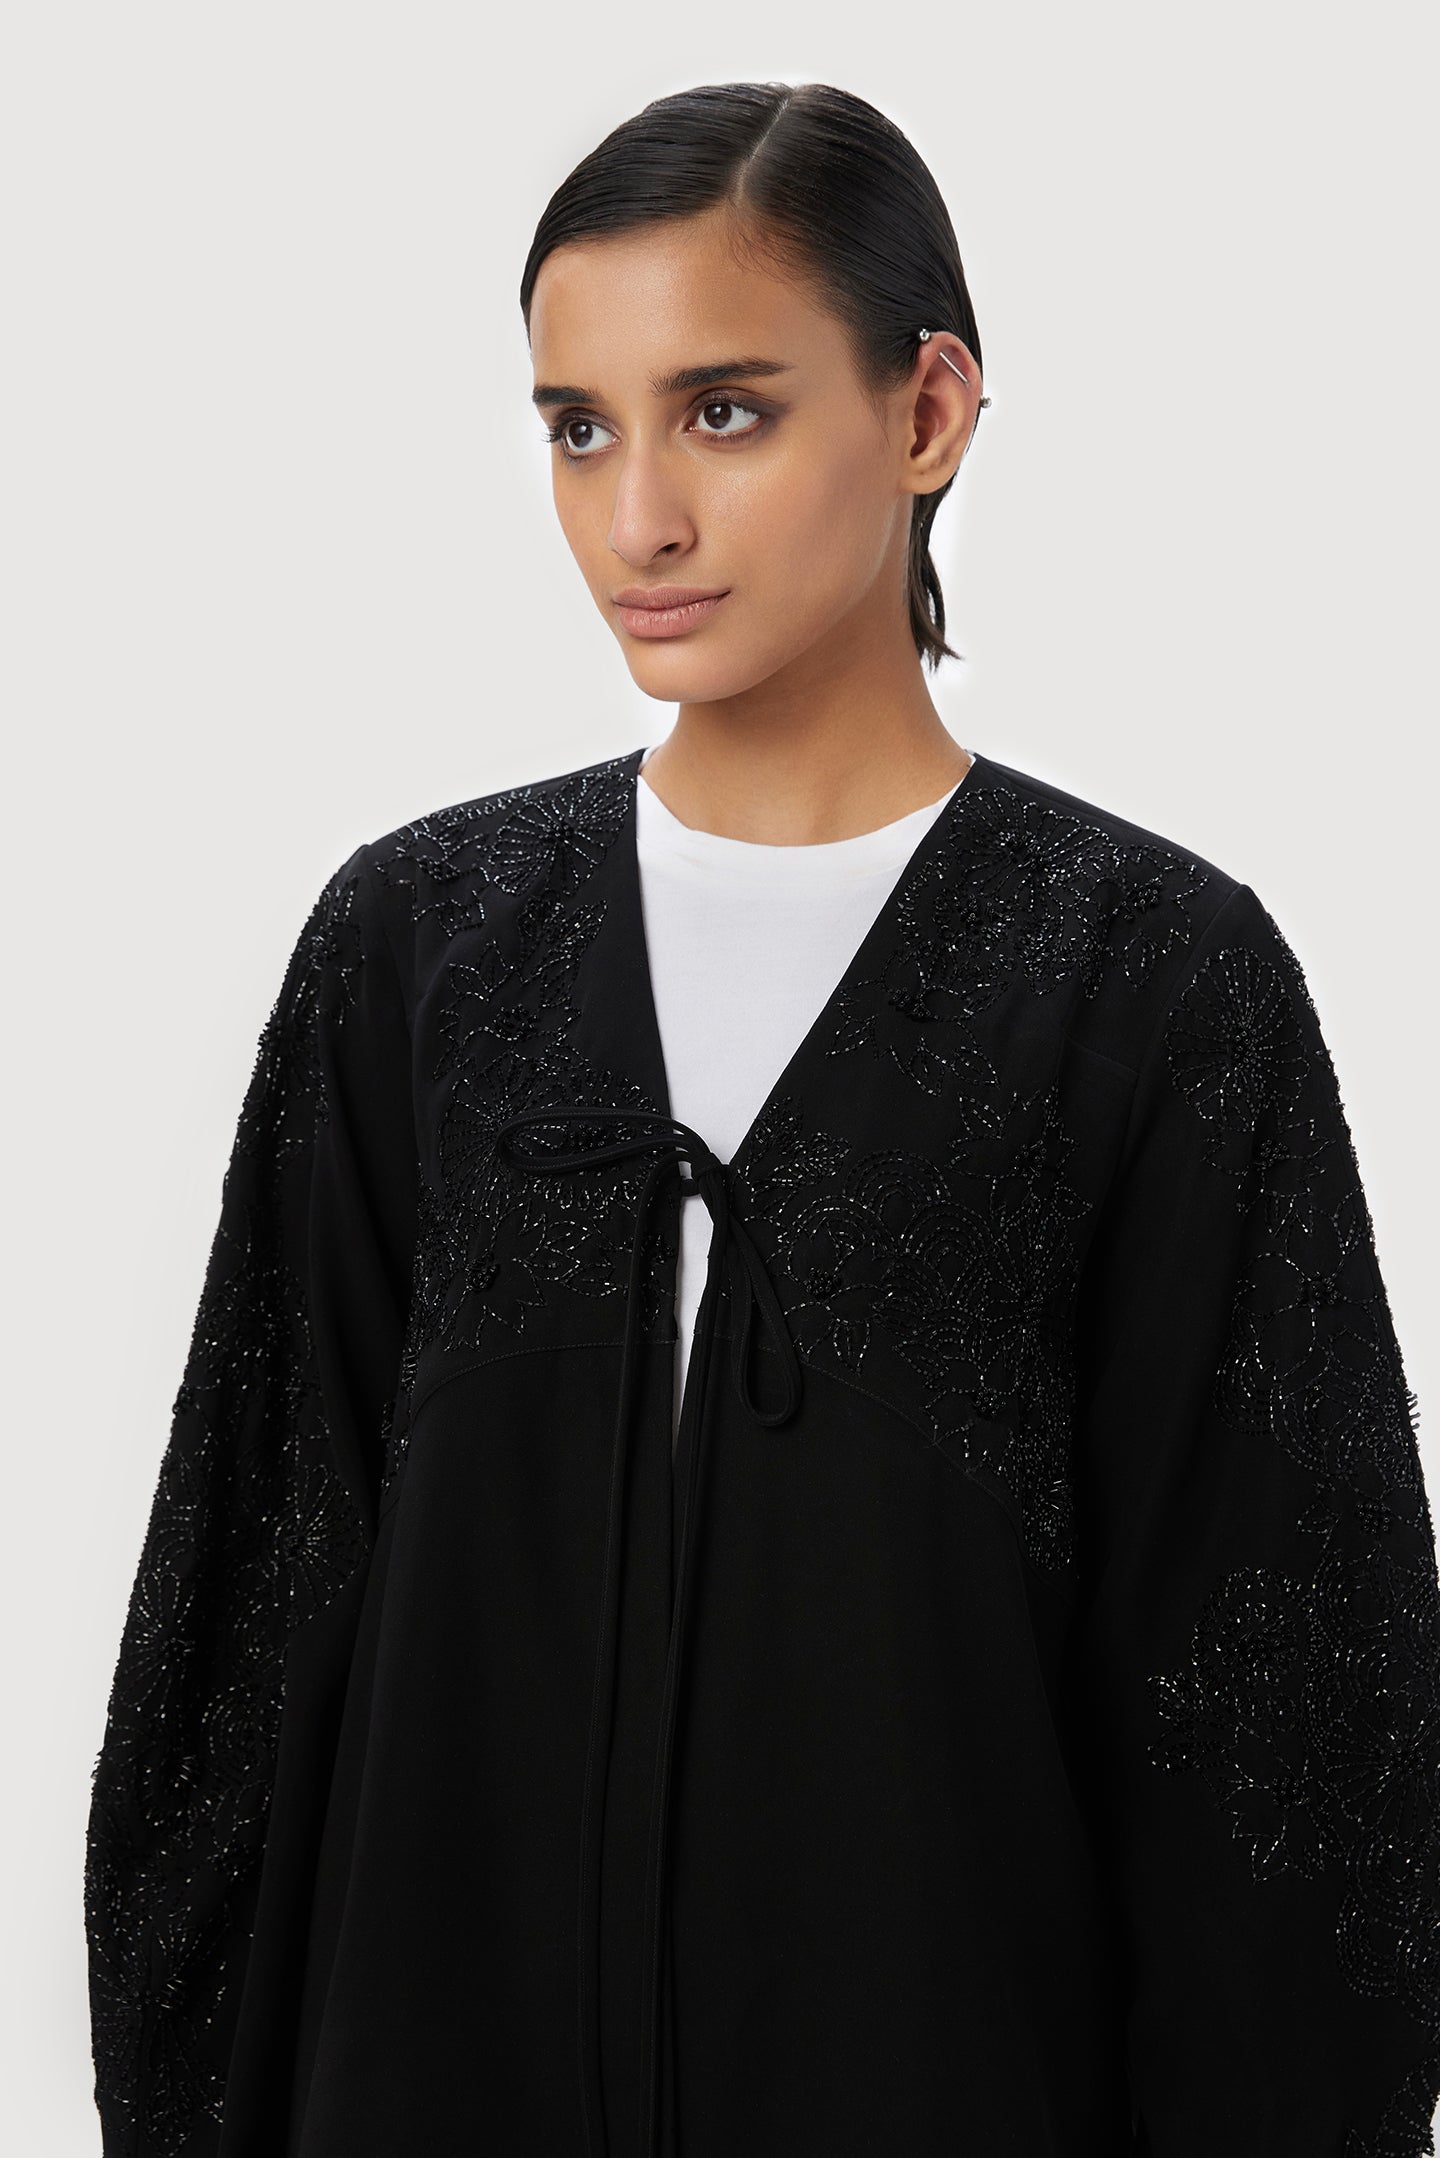 A-Line Jacket with V-Neck with Floral Beads Embroidery Placement